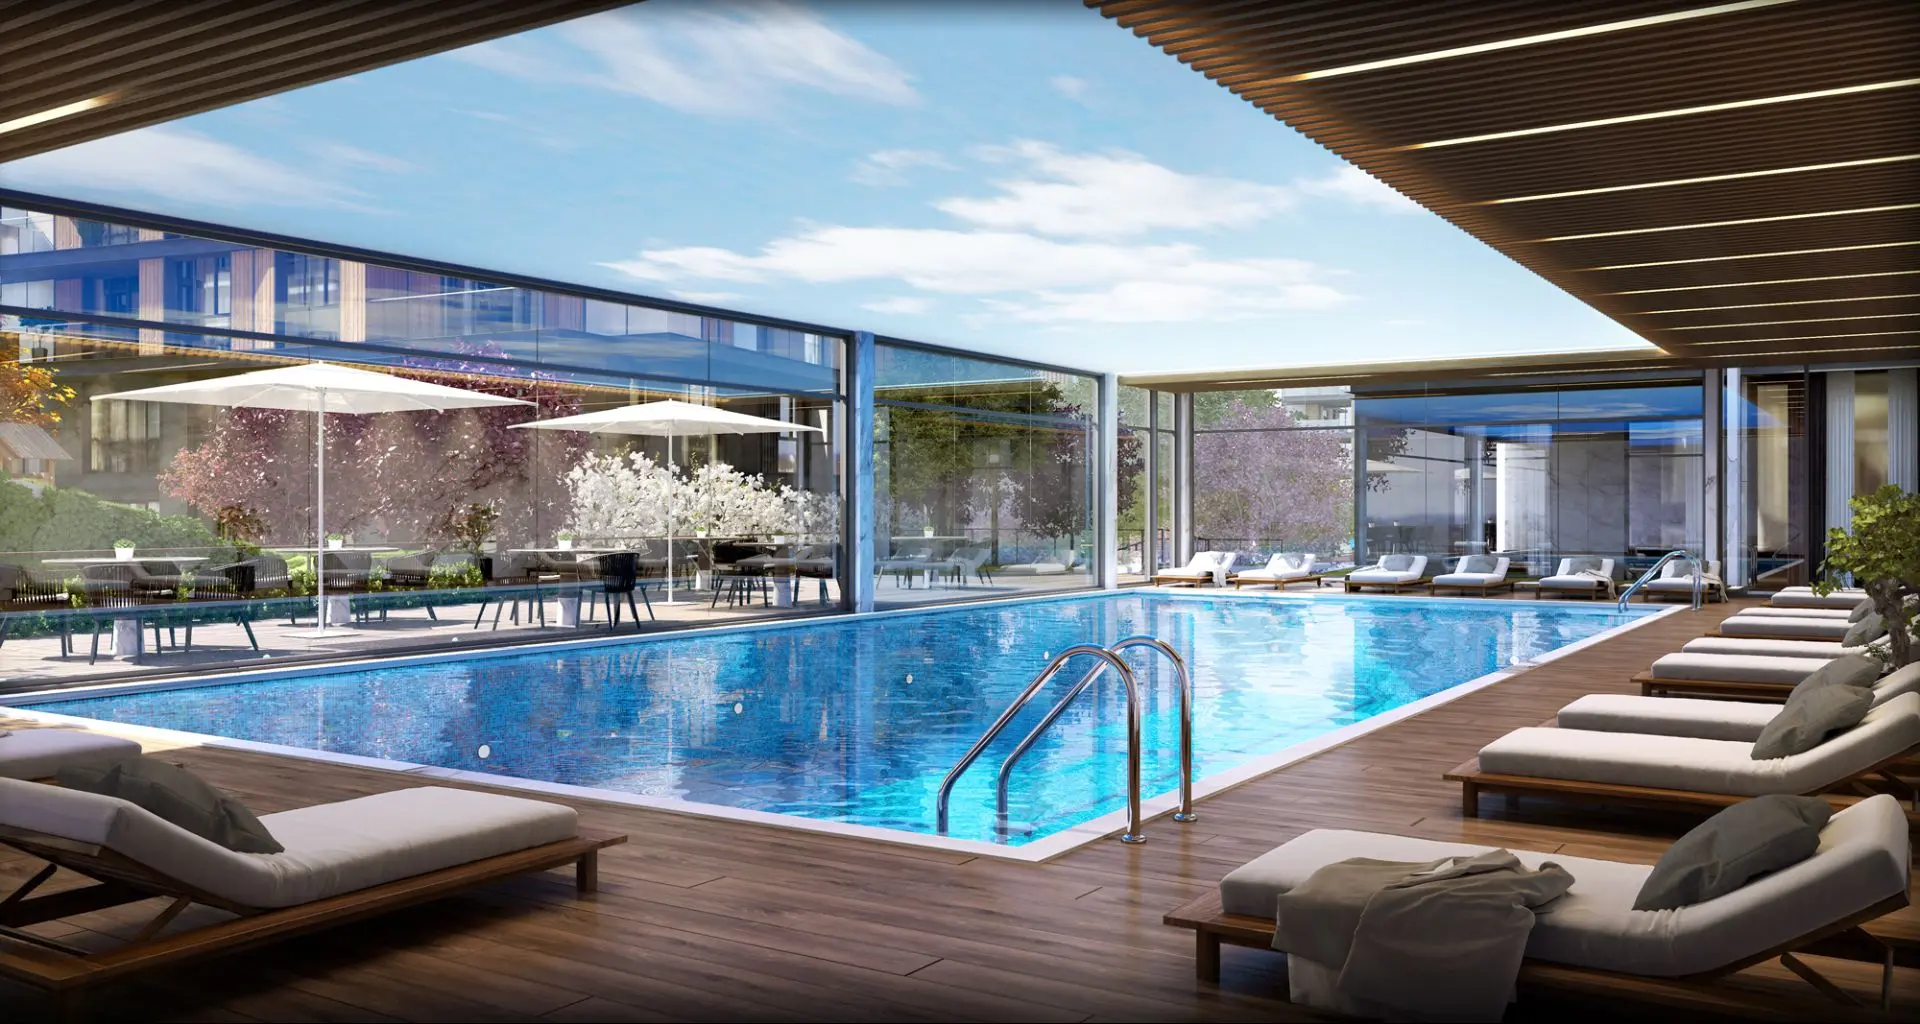 LUXURIOUS PROJECT OVERSEEING NATURE IN ISTANBUL